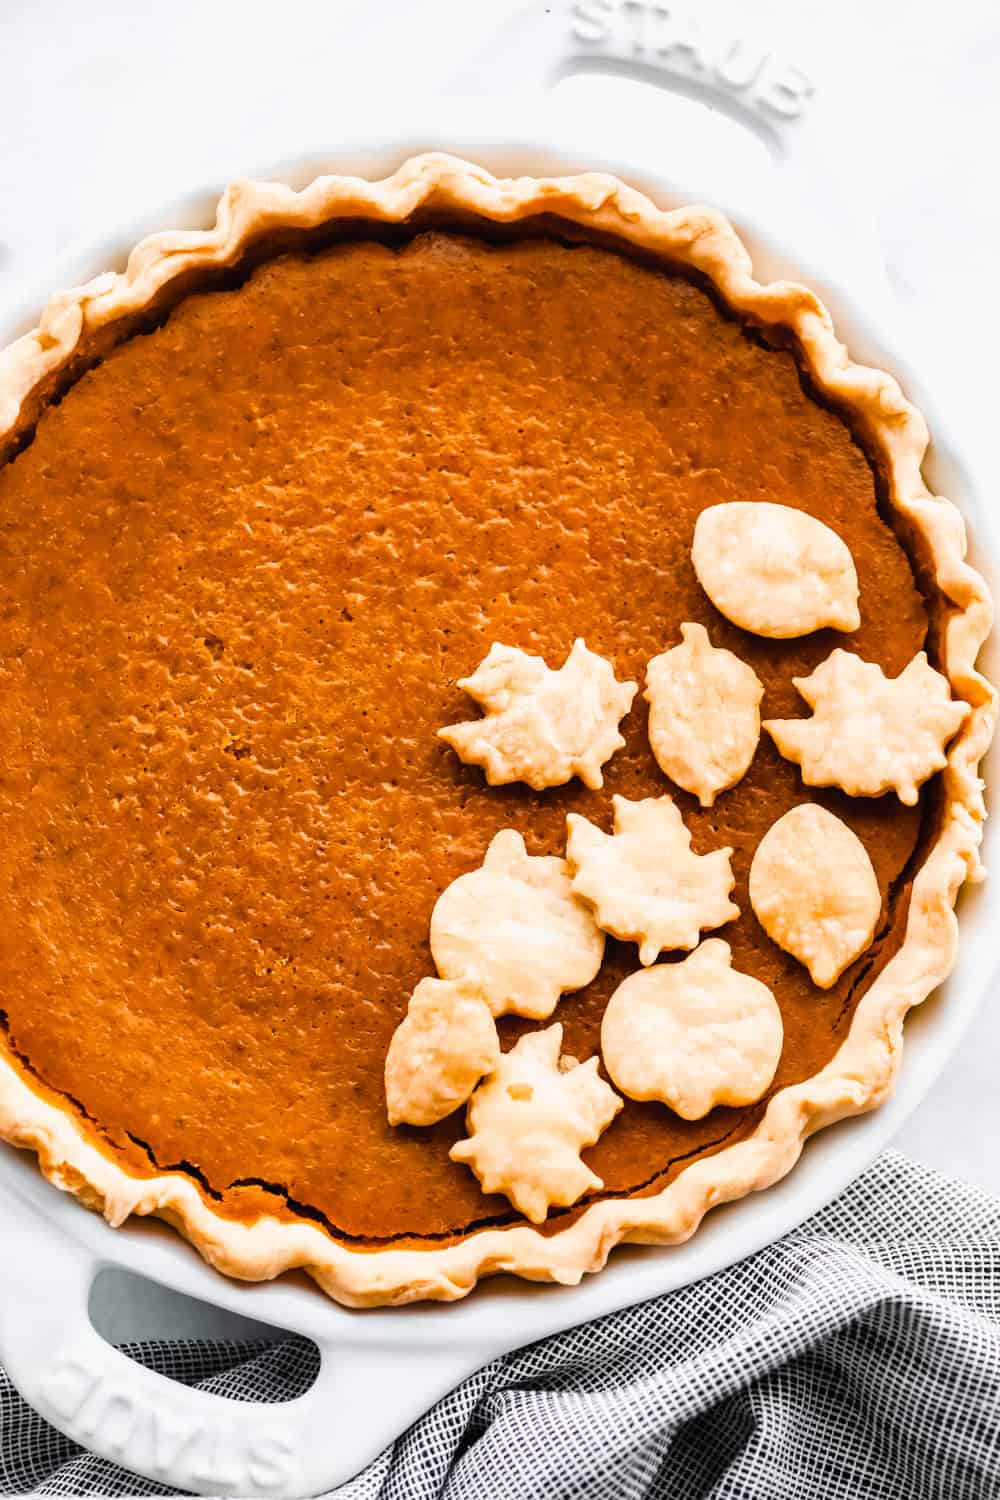 Baked pumpkin pie with decorative pie crust leaves